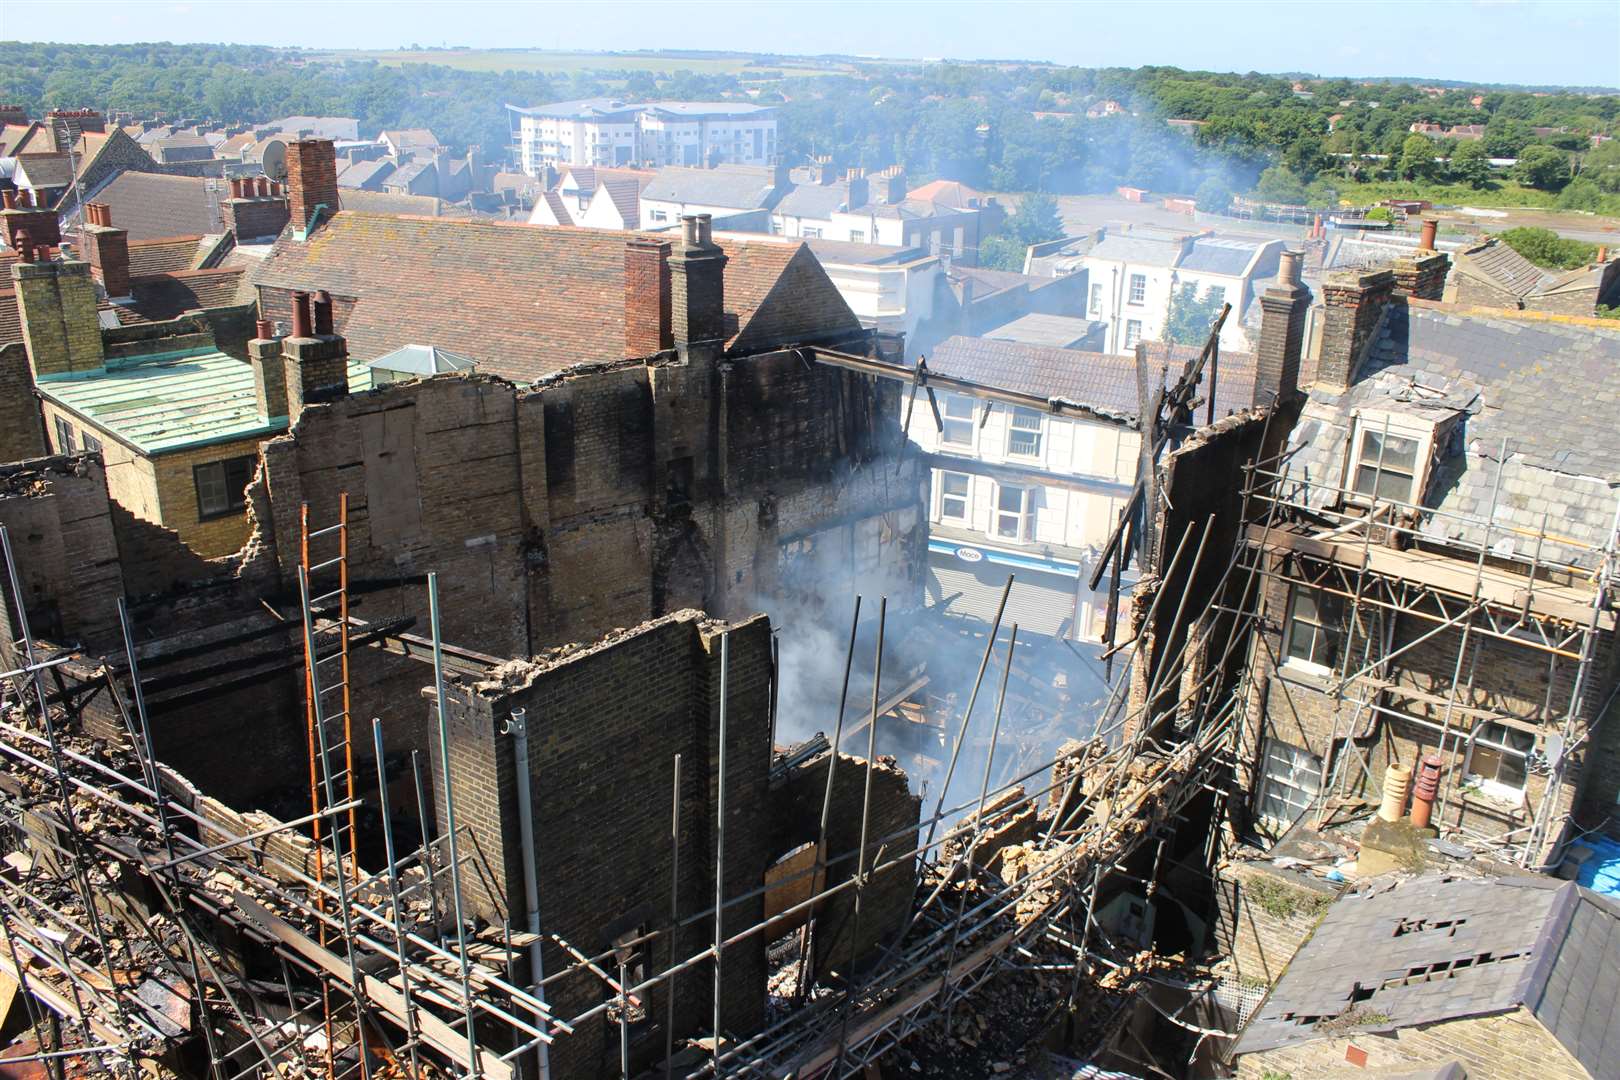 The wreckage from the fire in Margate